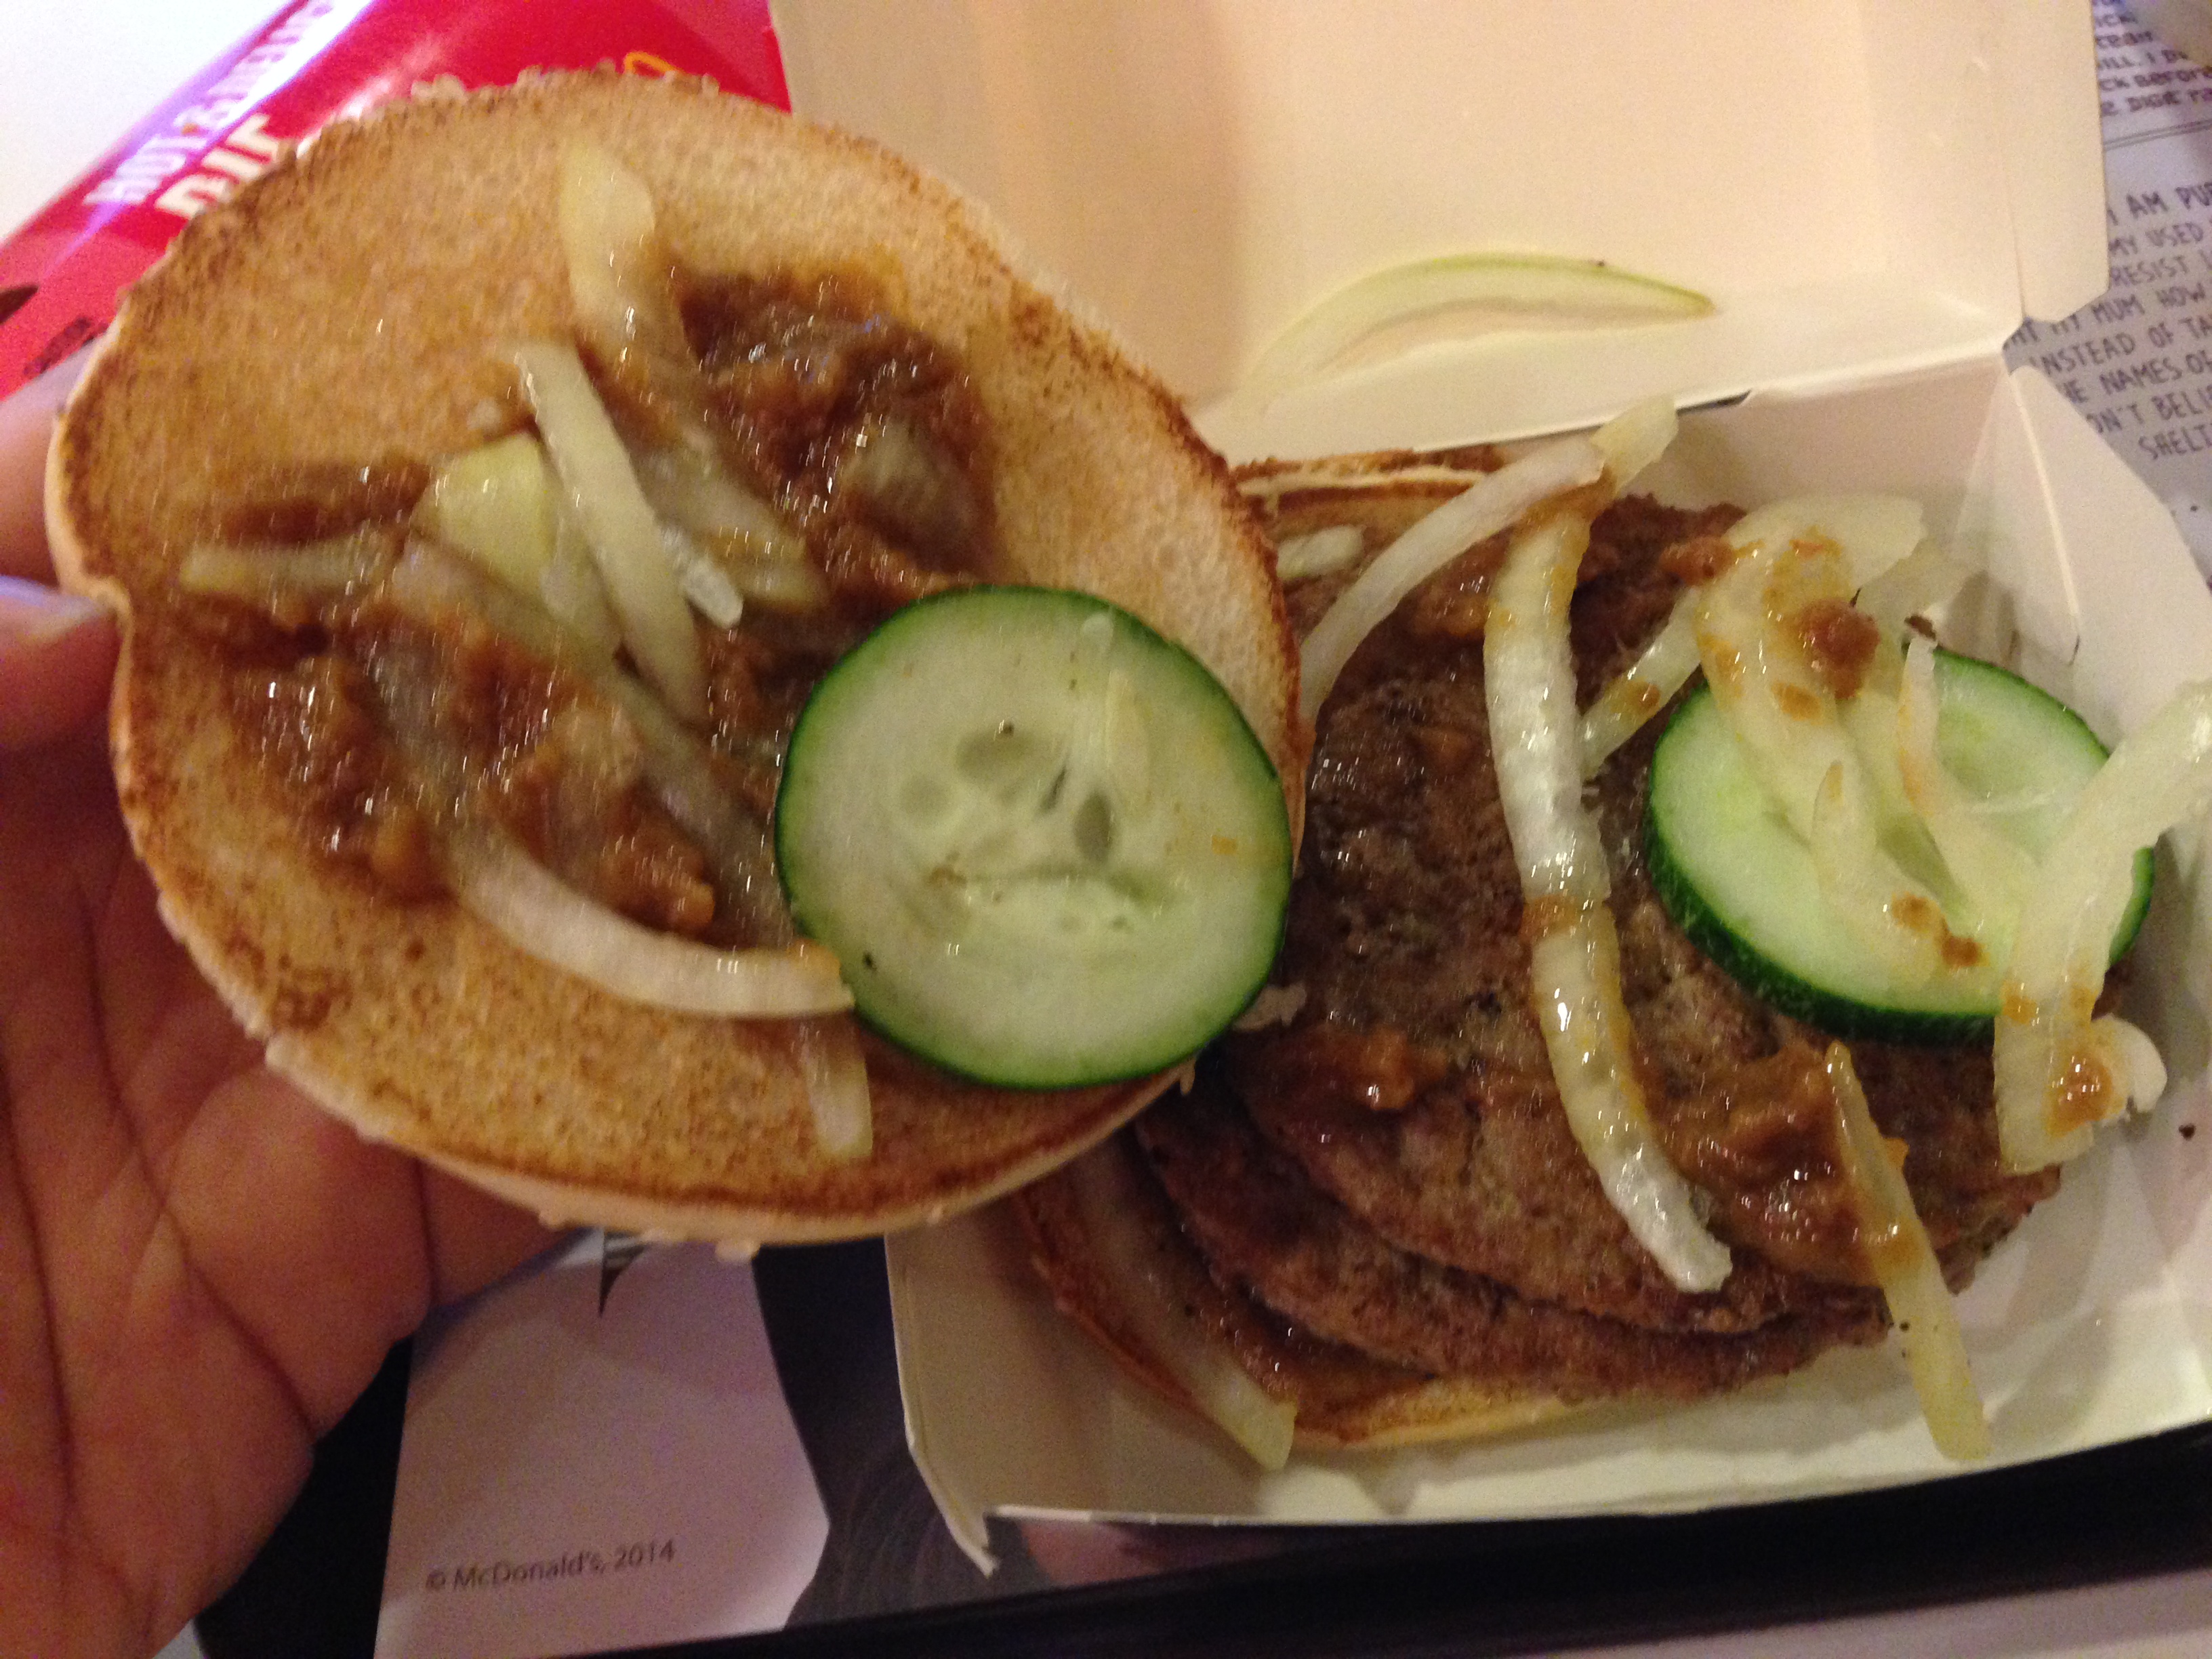 Not enough satay sauce in the burger.